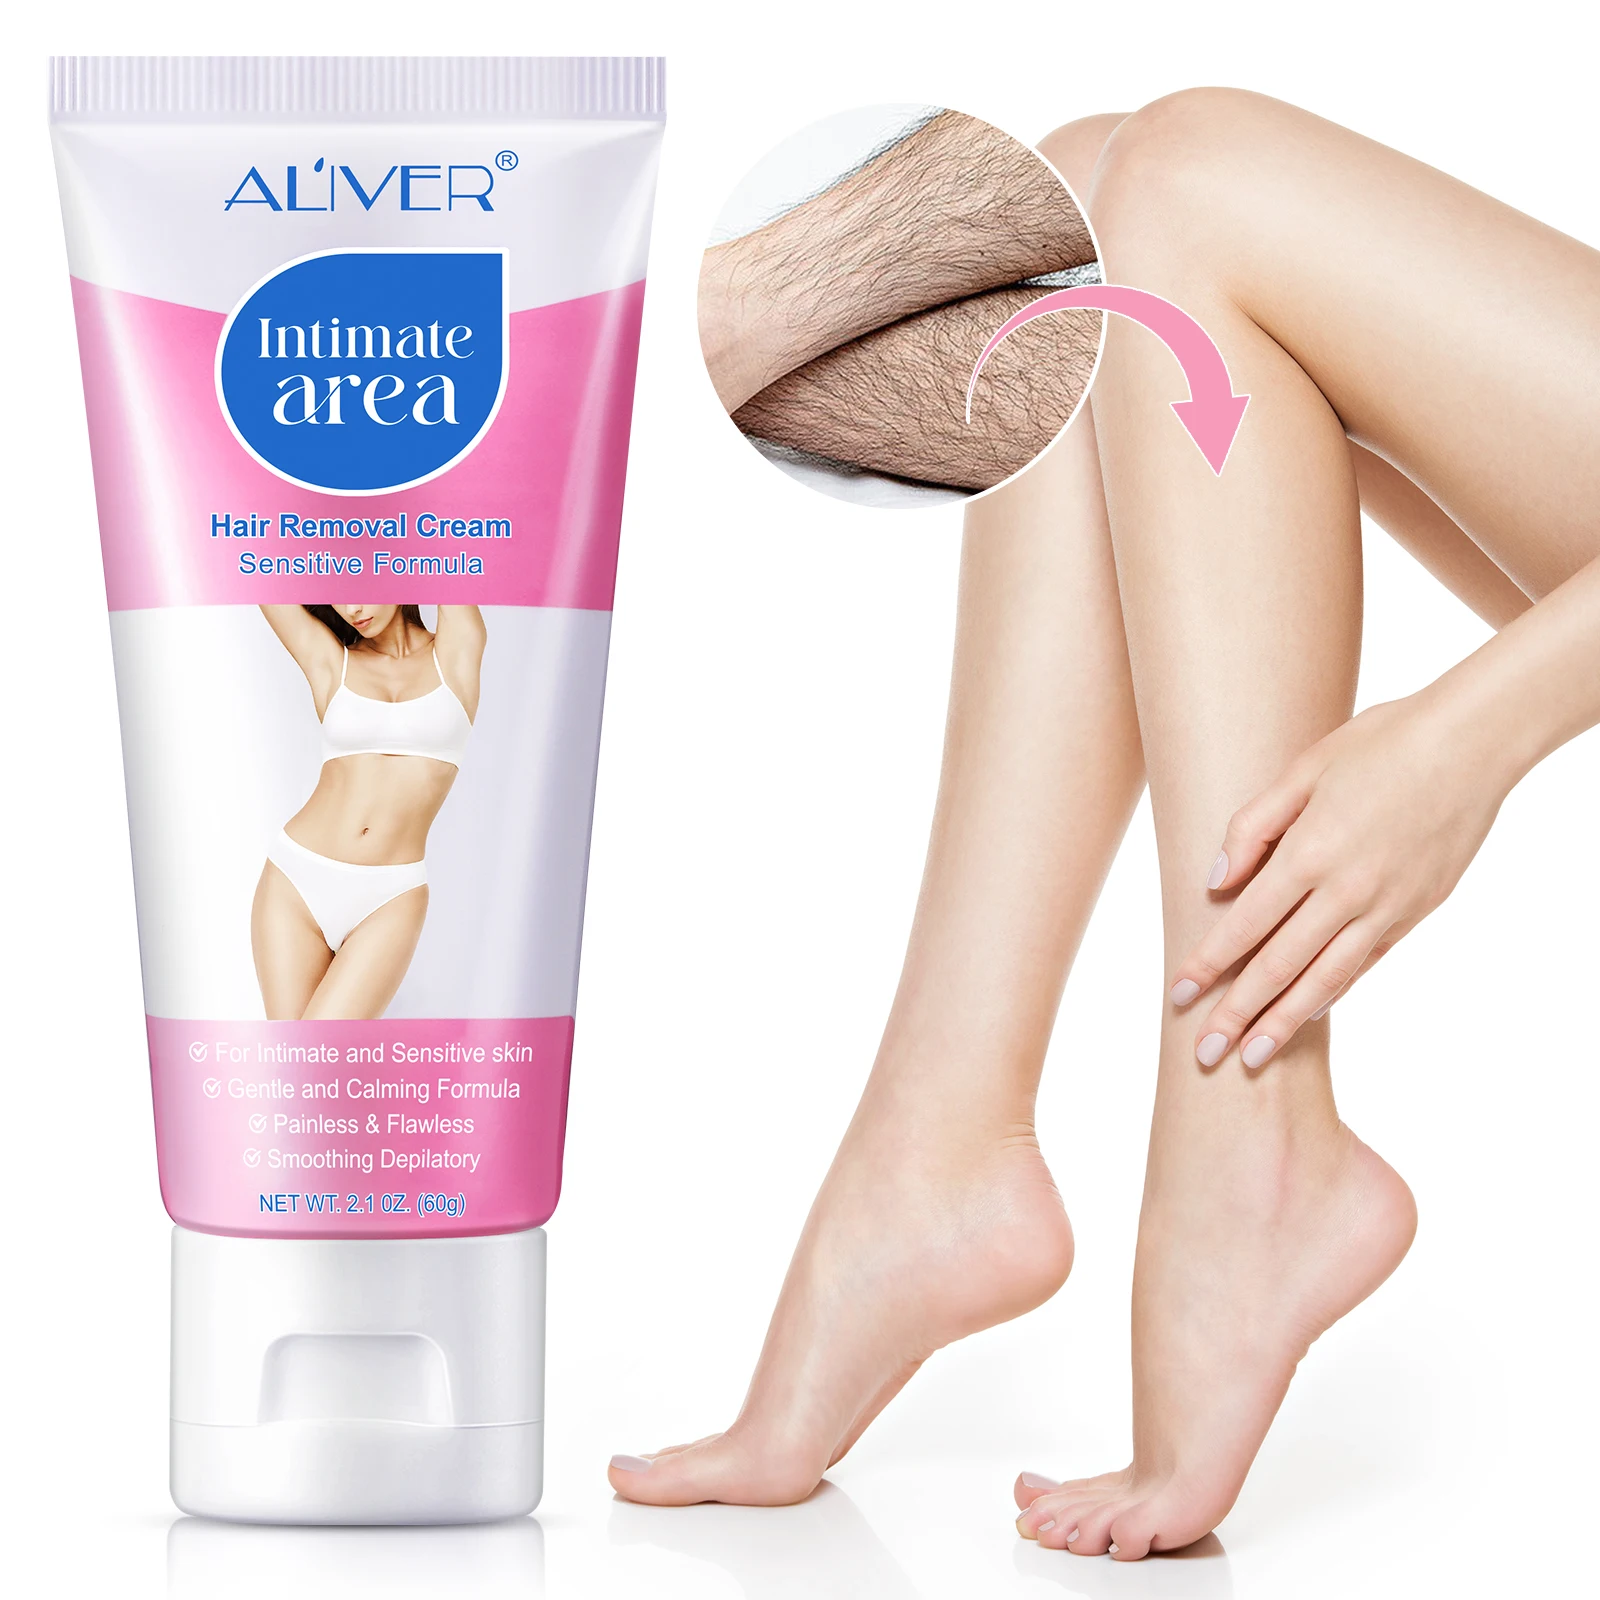 

ALIVER Quickly Efficiency Full Body Painless Depilatory Skin Smooth Armpit Hand Leg Intimate Area Permanent Hair Removal Cream